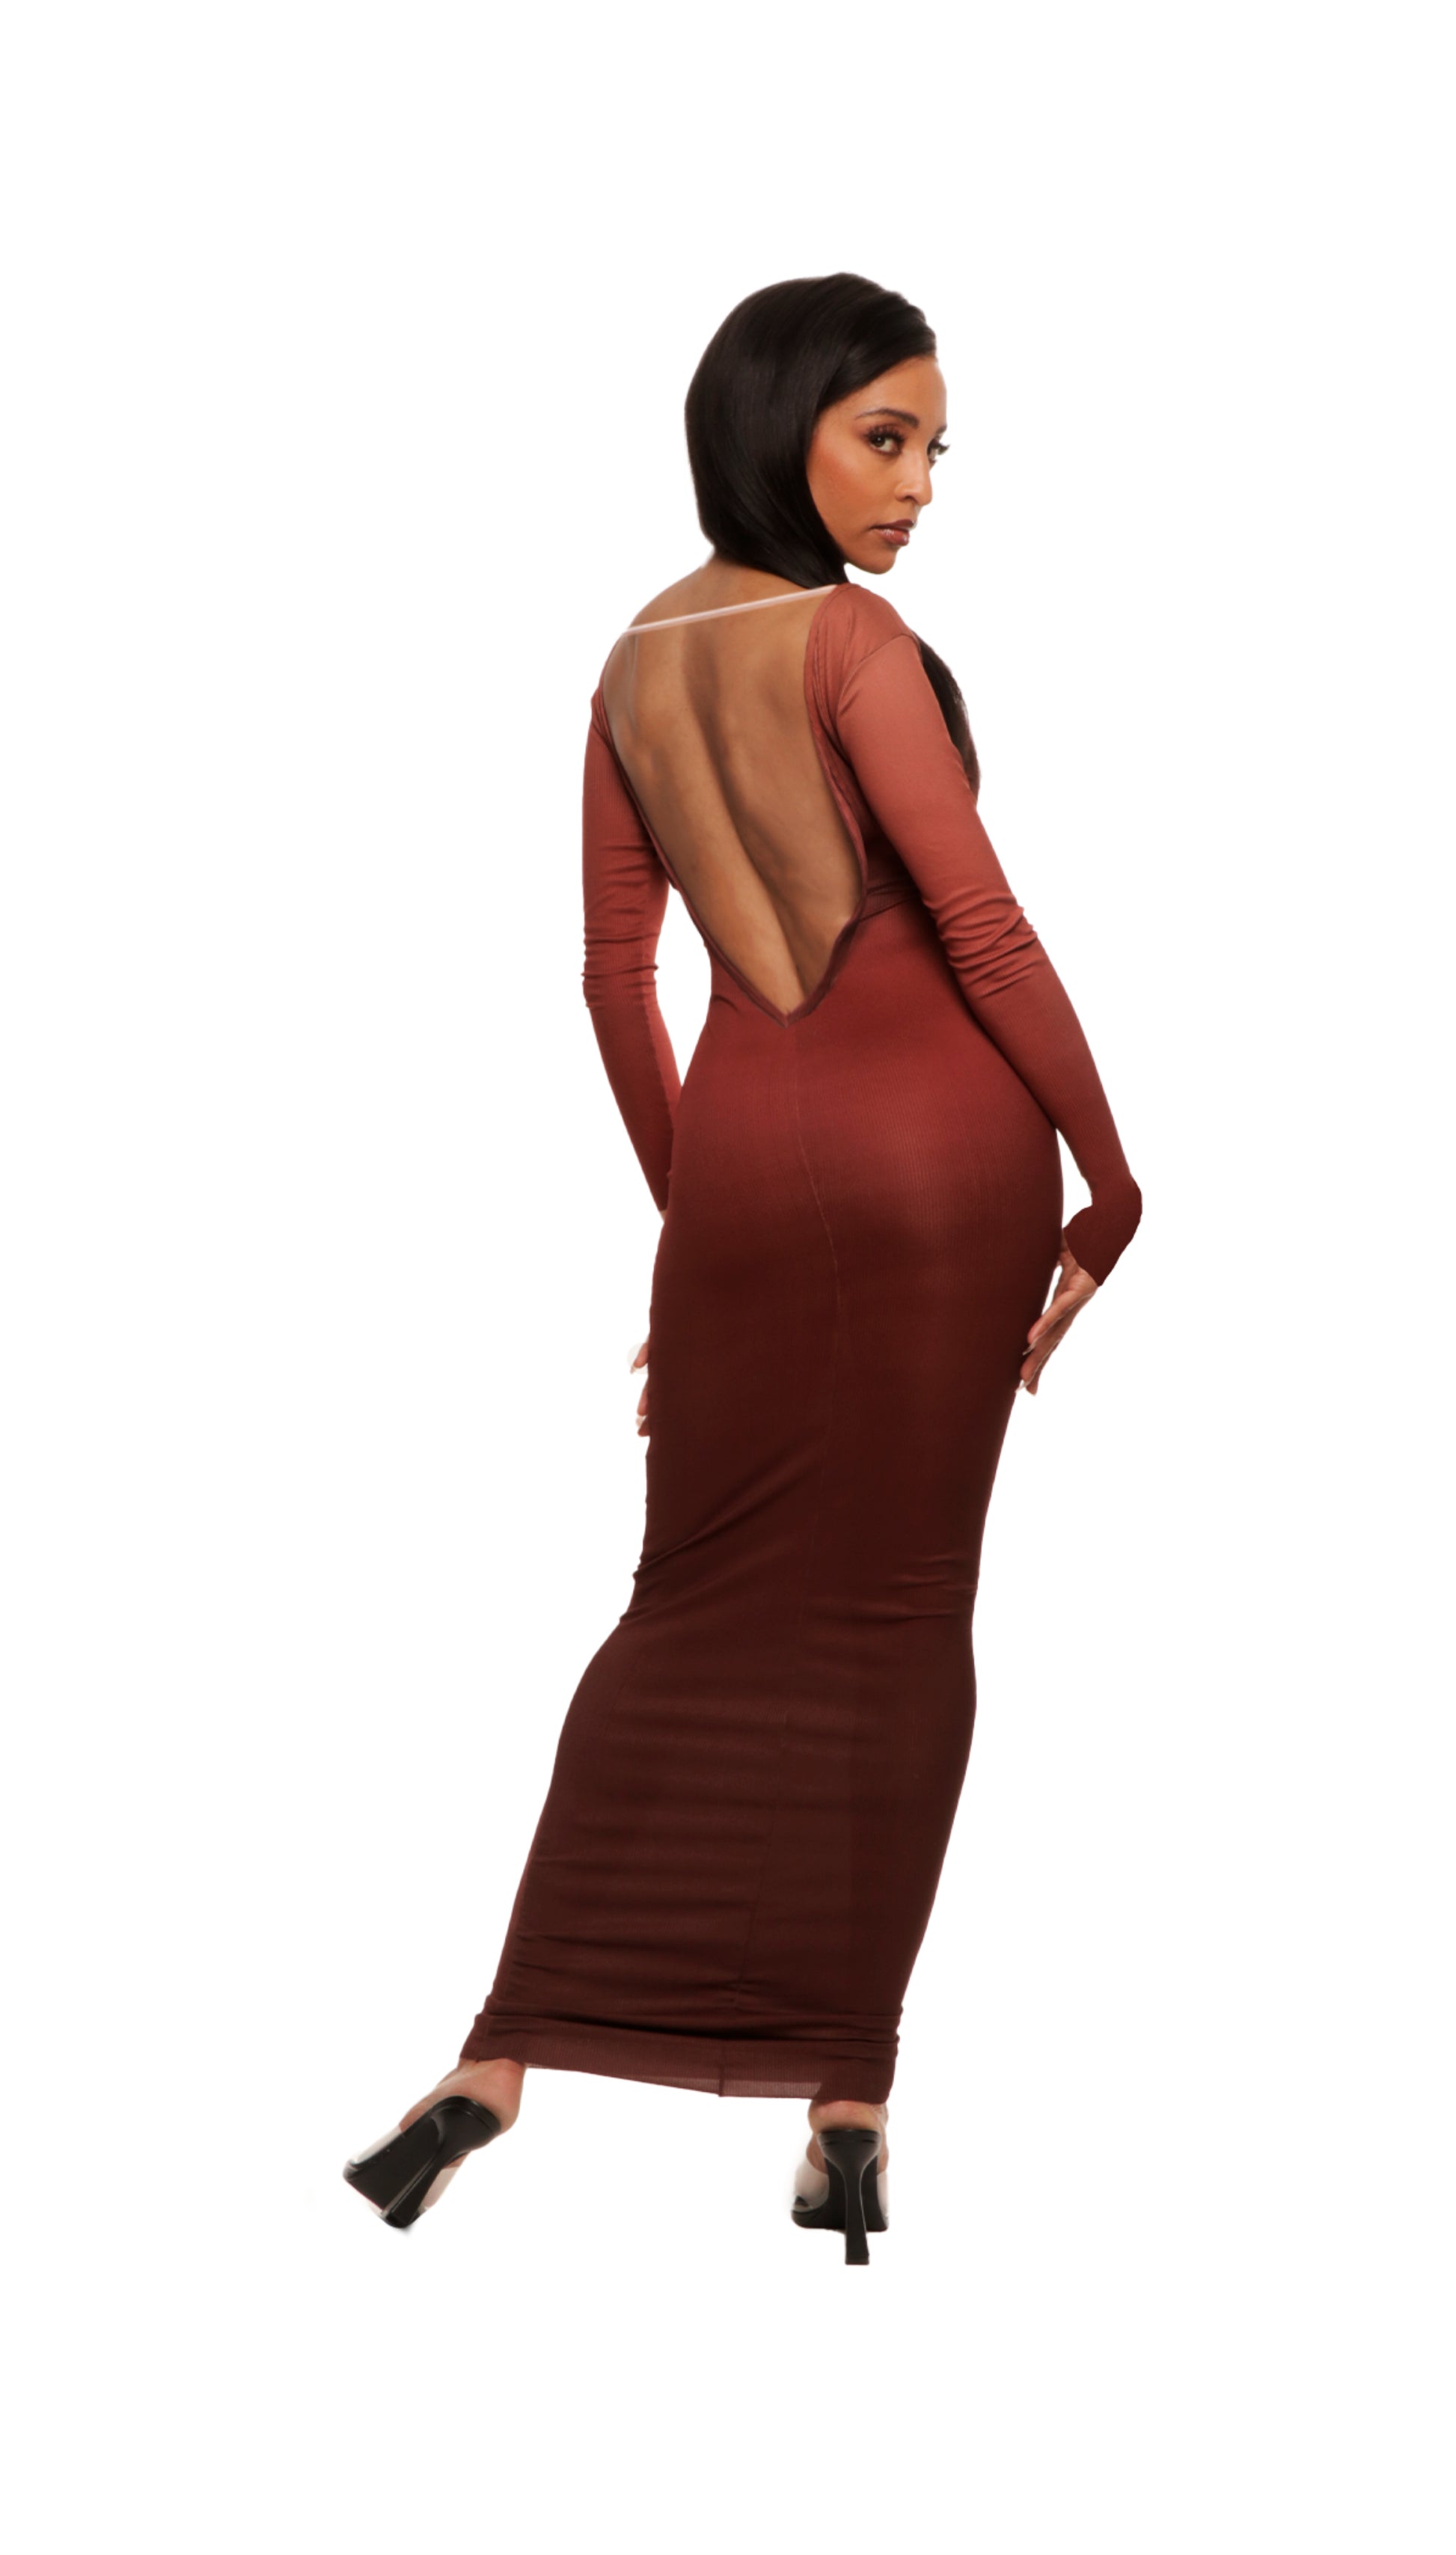 Woman who looks like Beyoncé or Aaliyah wears bodycon brown gradient printed stretch rib knit maxi dress with gauntlet sleeve detail and adjustable deep 'v' neckline, back view.